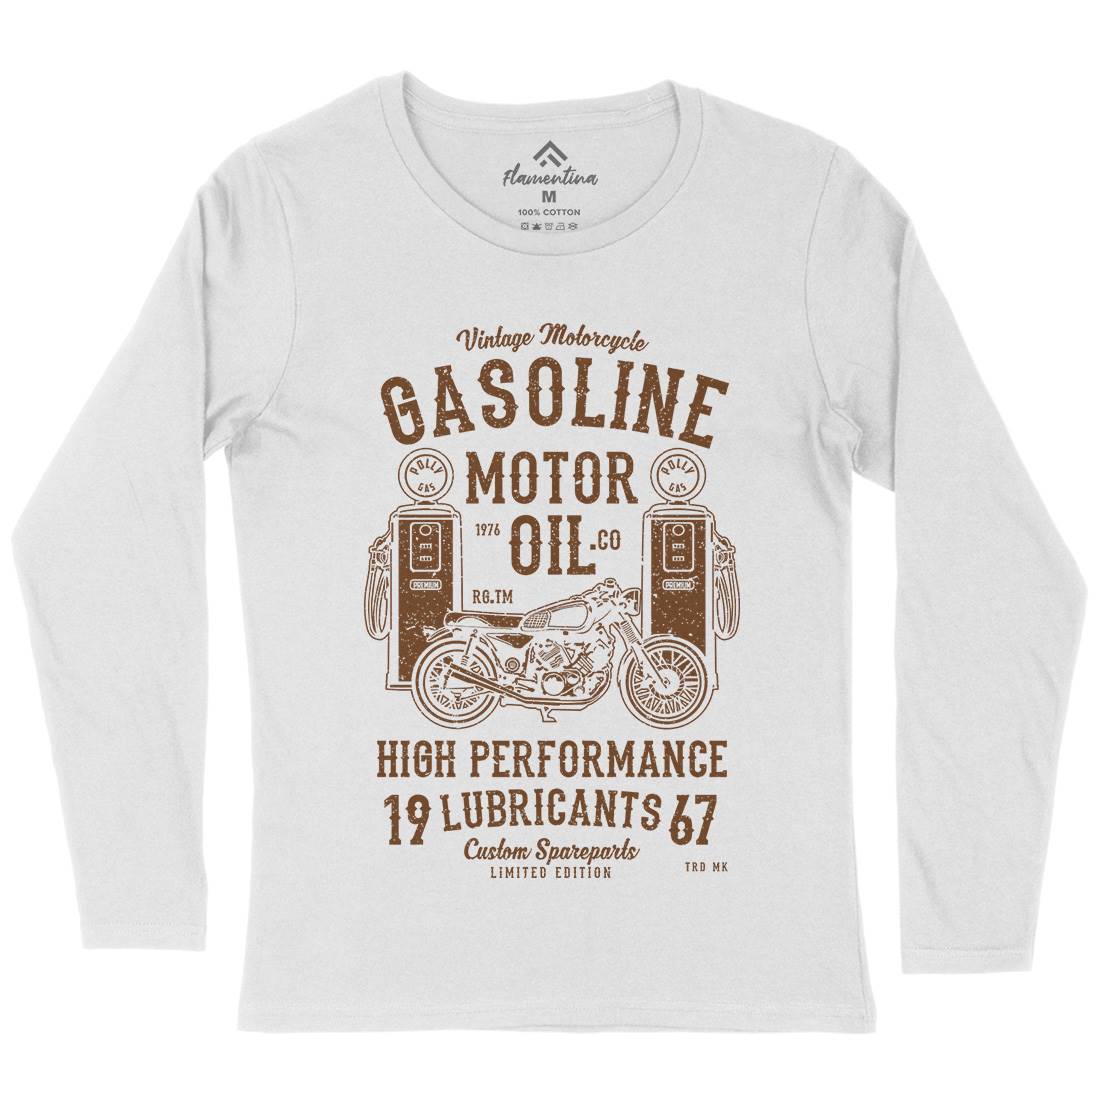 Gasoline Motor Oil Womens Long Sleeve T-Shirt Motorcycles A669